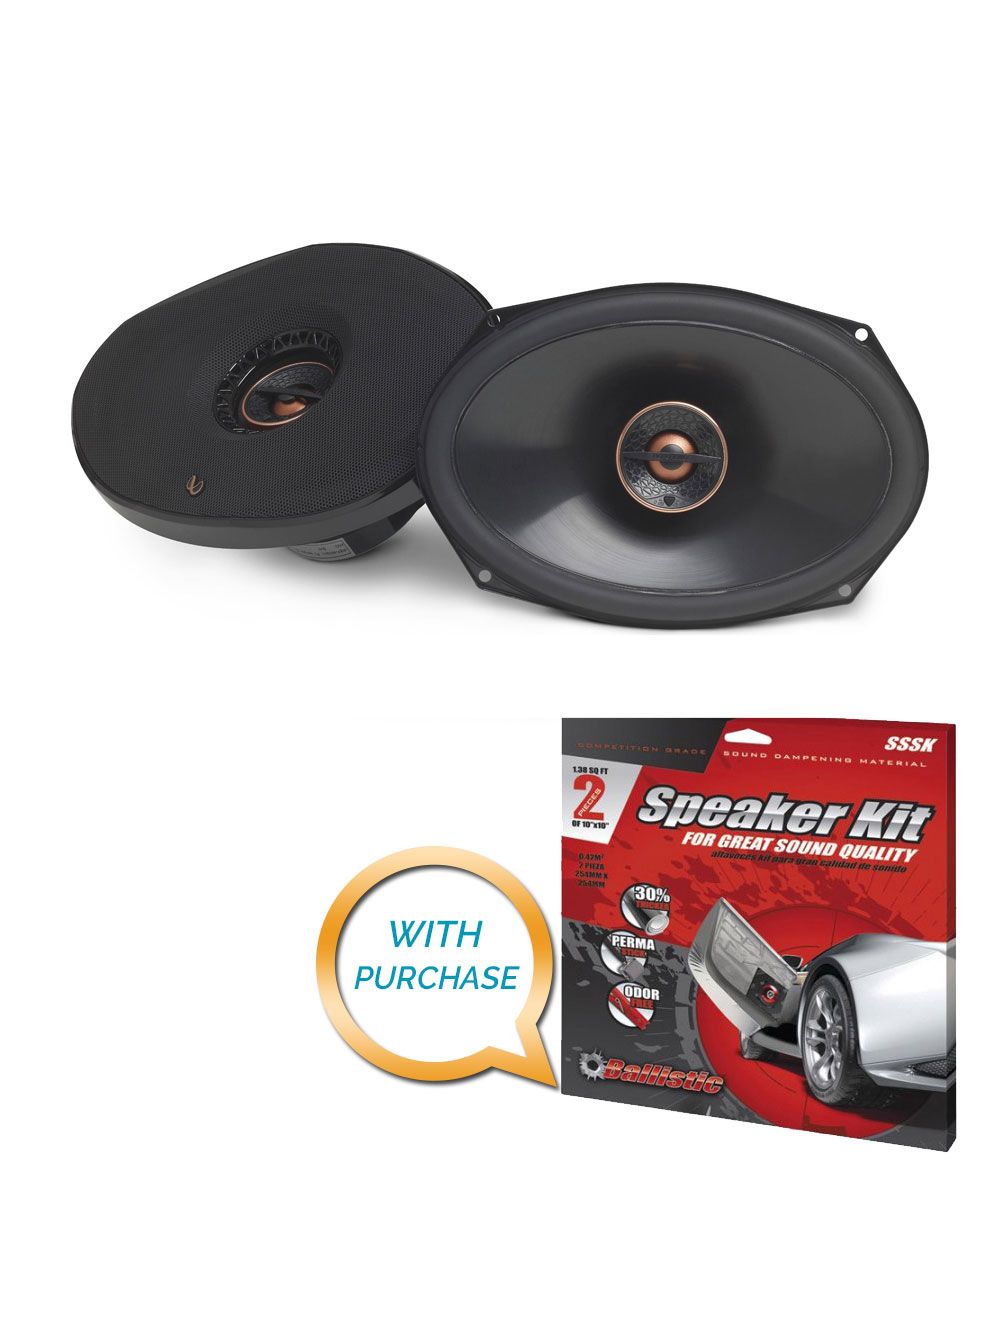 Infinity Reference REF-9632ix 6" x 9" Two-way car audio speaker (REF9632) with Sound Deadening Kit